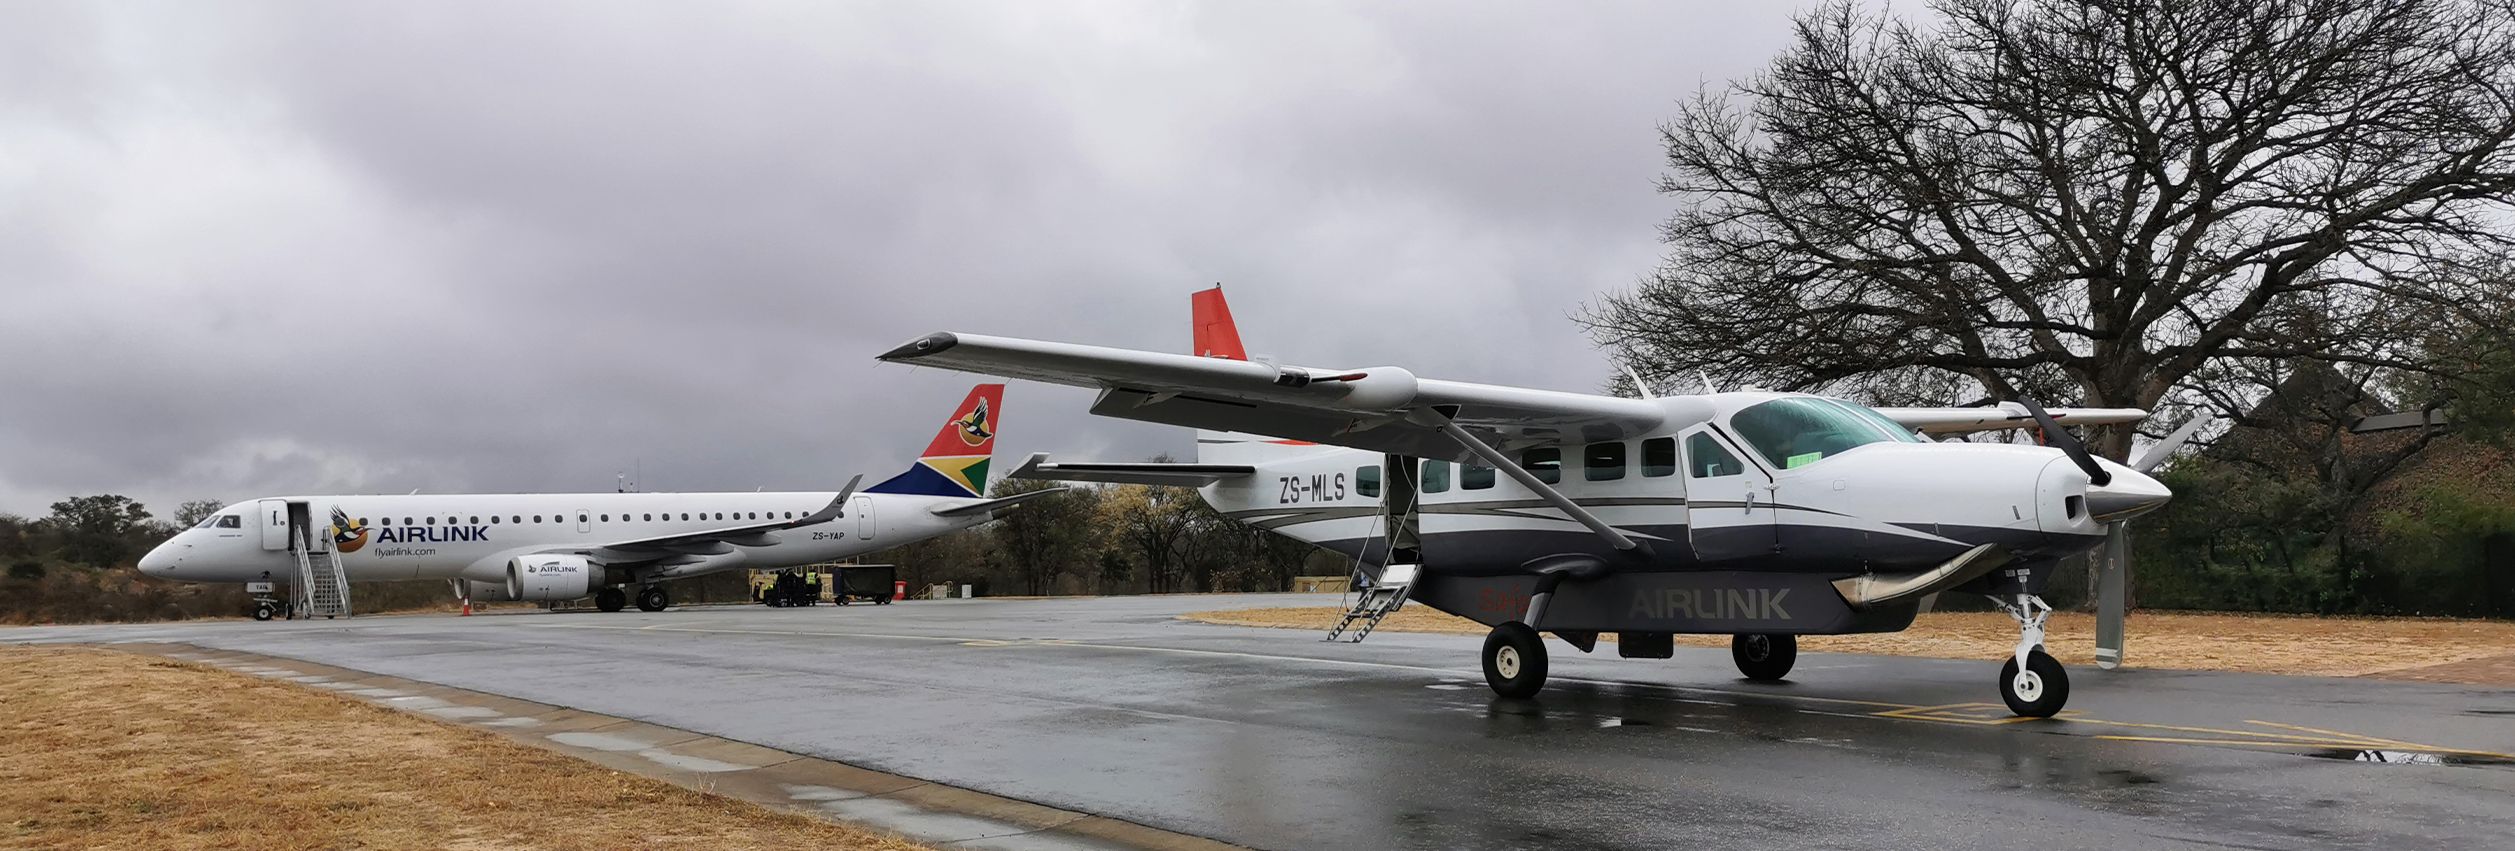 Skukuza Flights to Resume on 28 January 2021 – Daily Service From March